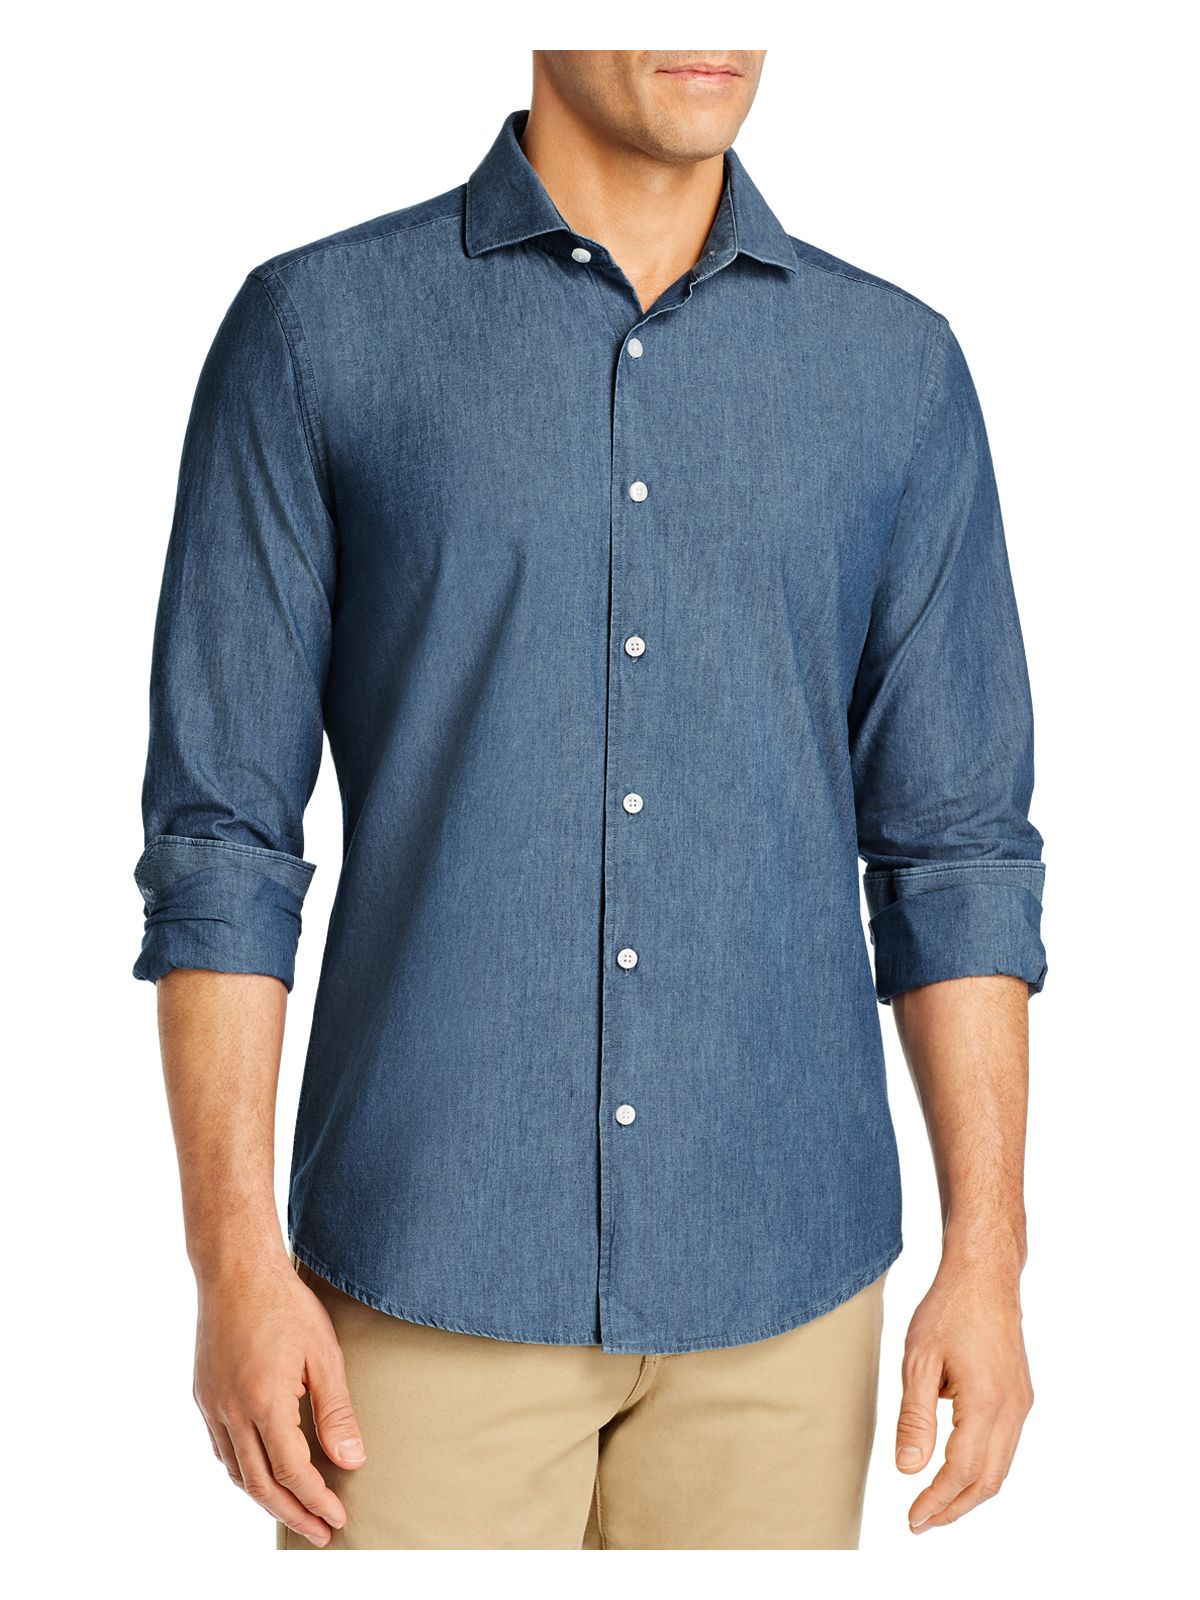 DYLAN GRAY Mens Navy Long Sleeve Classic Fit Button Down Casual Shirt S